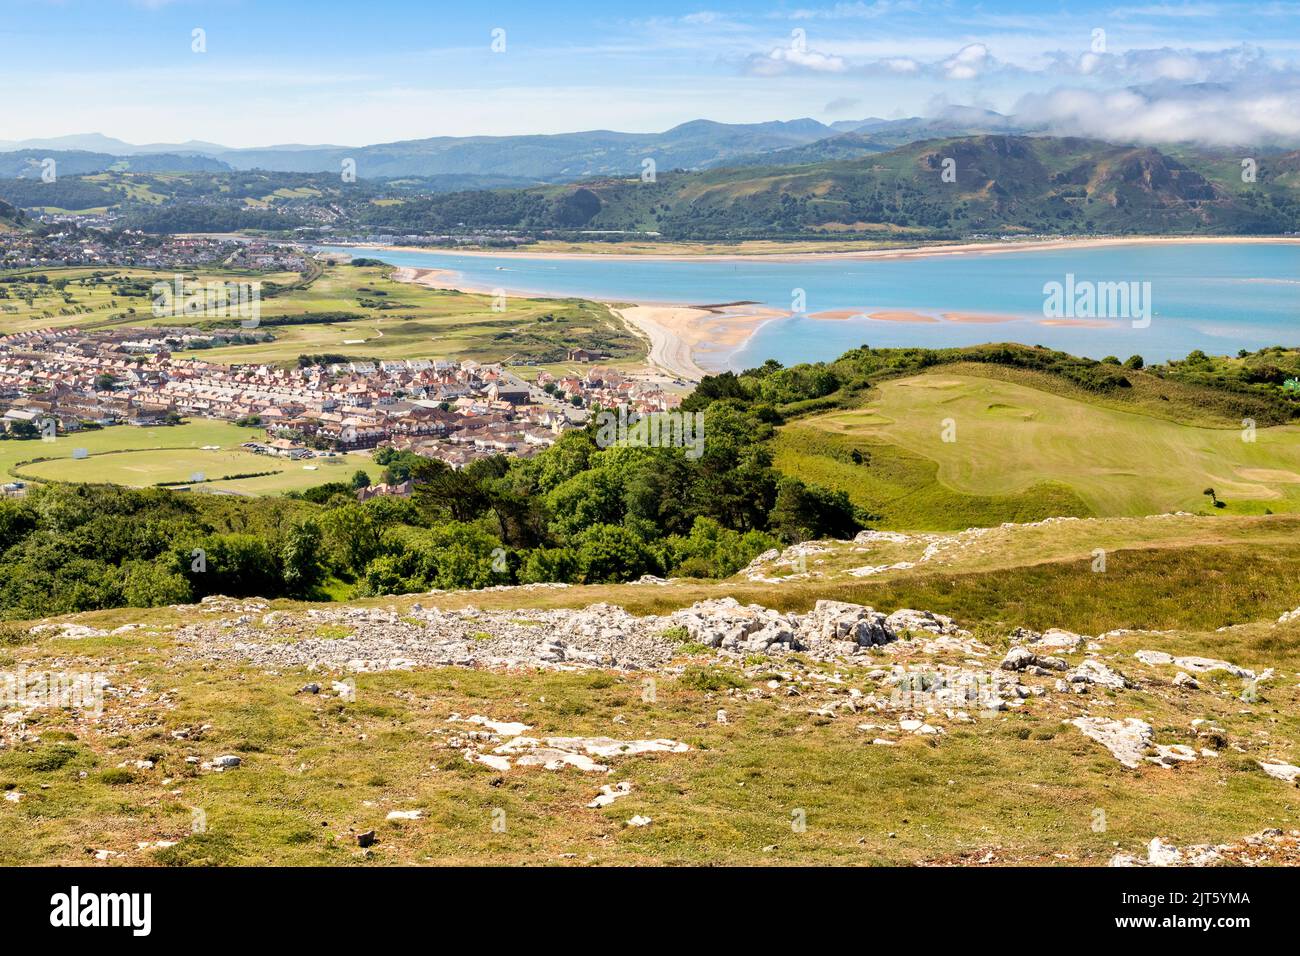 Llandudno West Shore from the Great Orme, with views over the cricket oval, golf course, beach, houses, the Conwy Estuary and the mountains of Snowdon Stock Photo